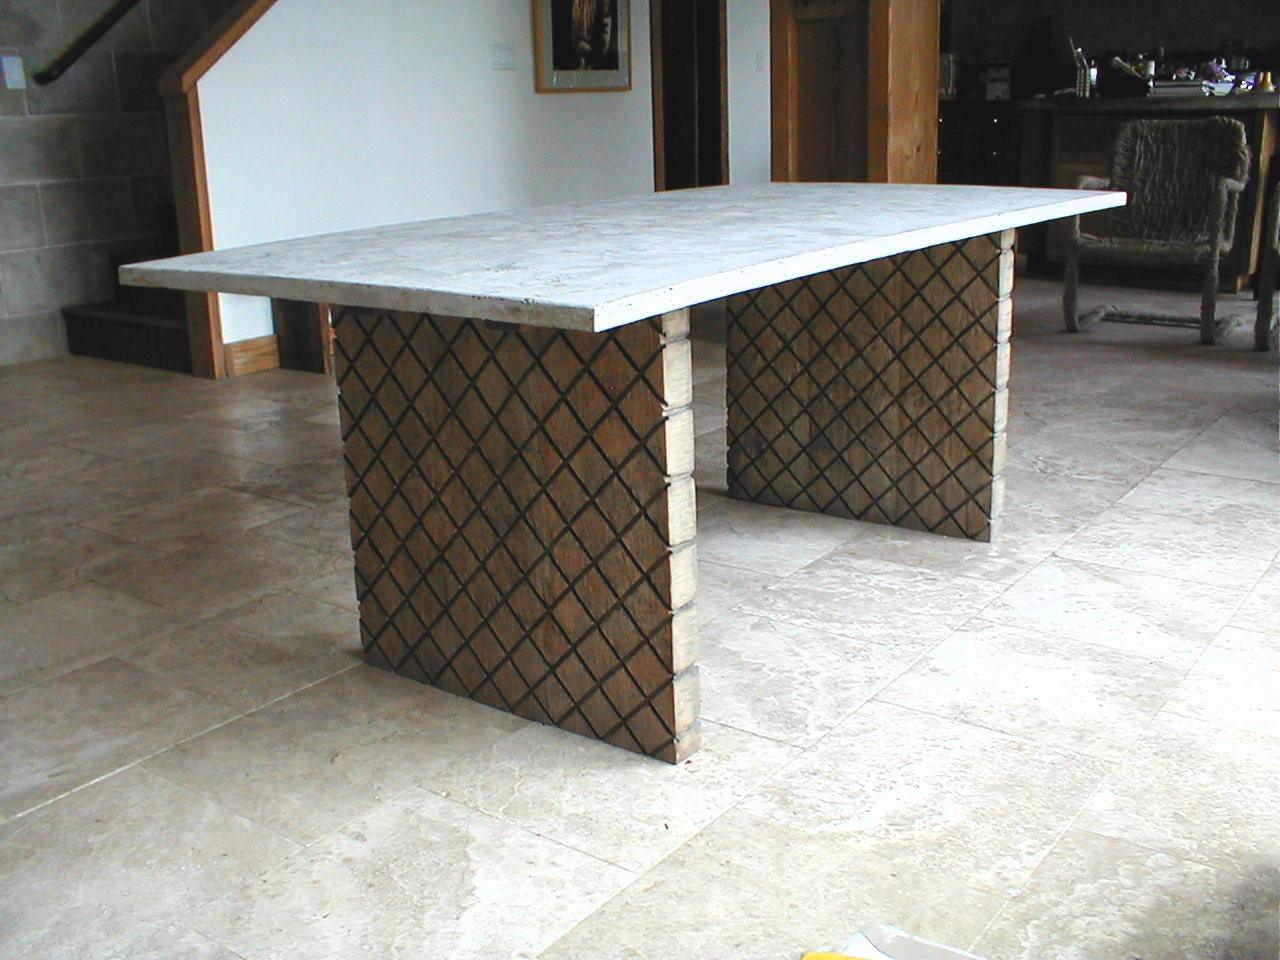 concrete dining table with cross-hatched wood base